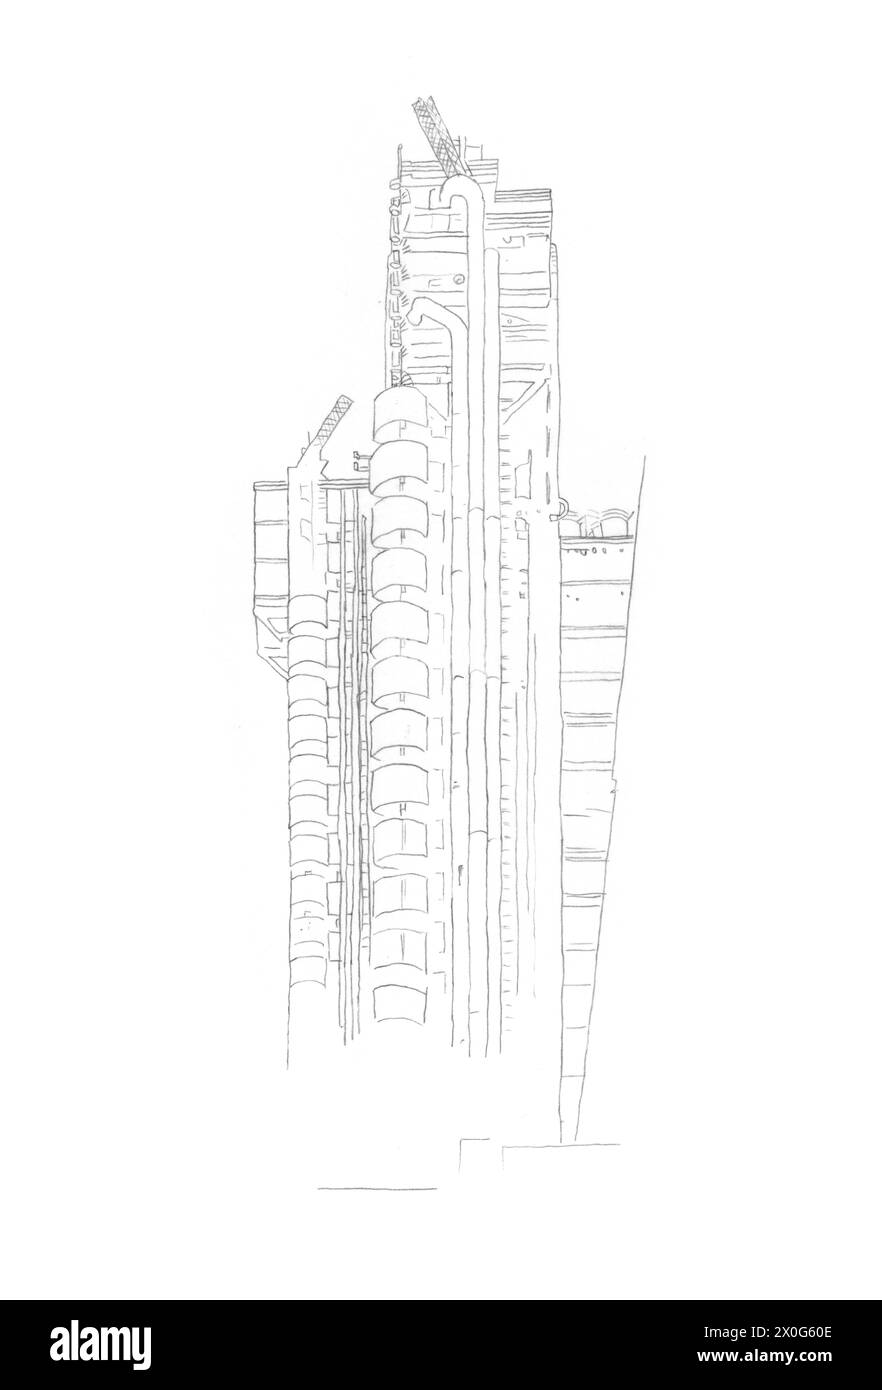 Architectural pencil drawing sketch of the Lloyd's skyscraper building in London, UK Stock Photo